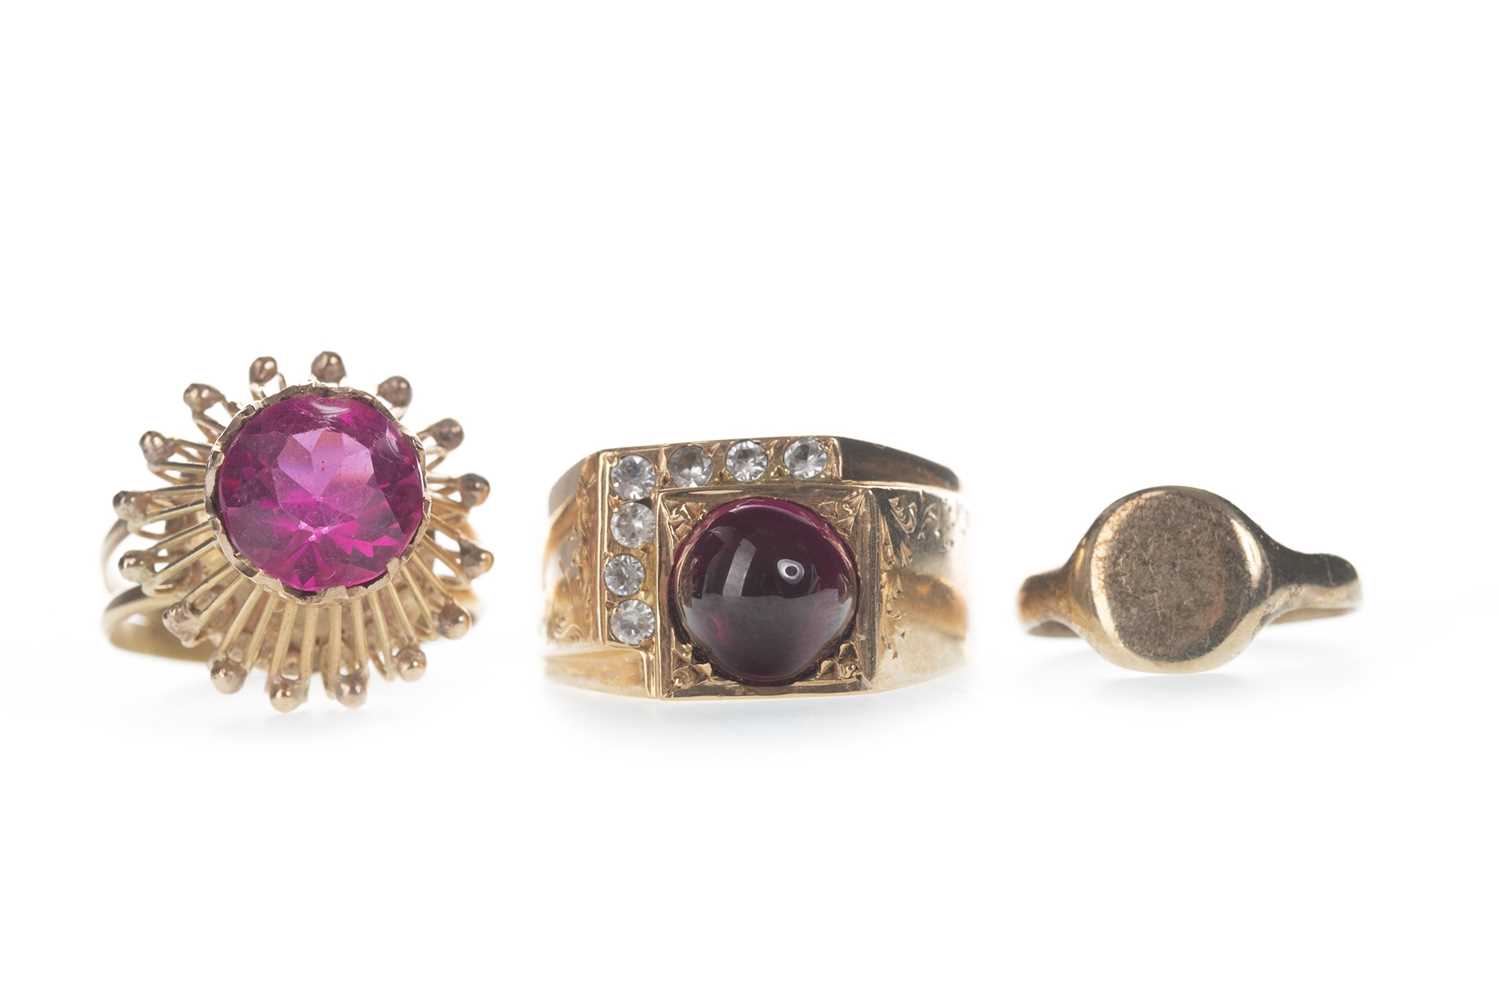 Lot 305 - TWO GEM SET RINGS AND A SIGNET RING